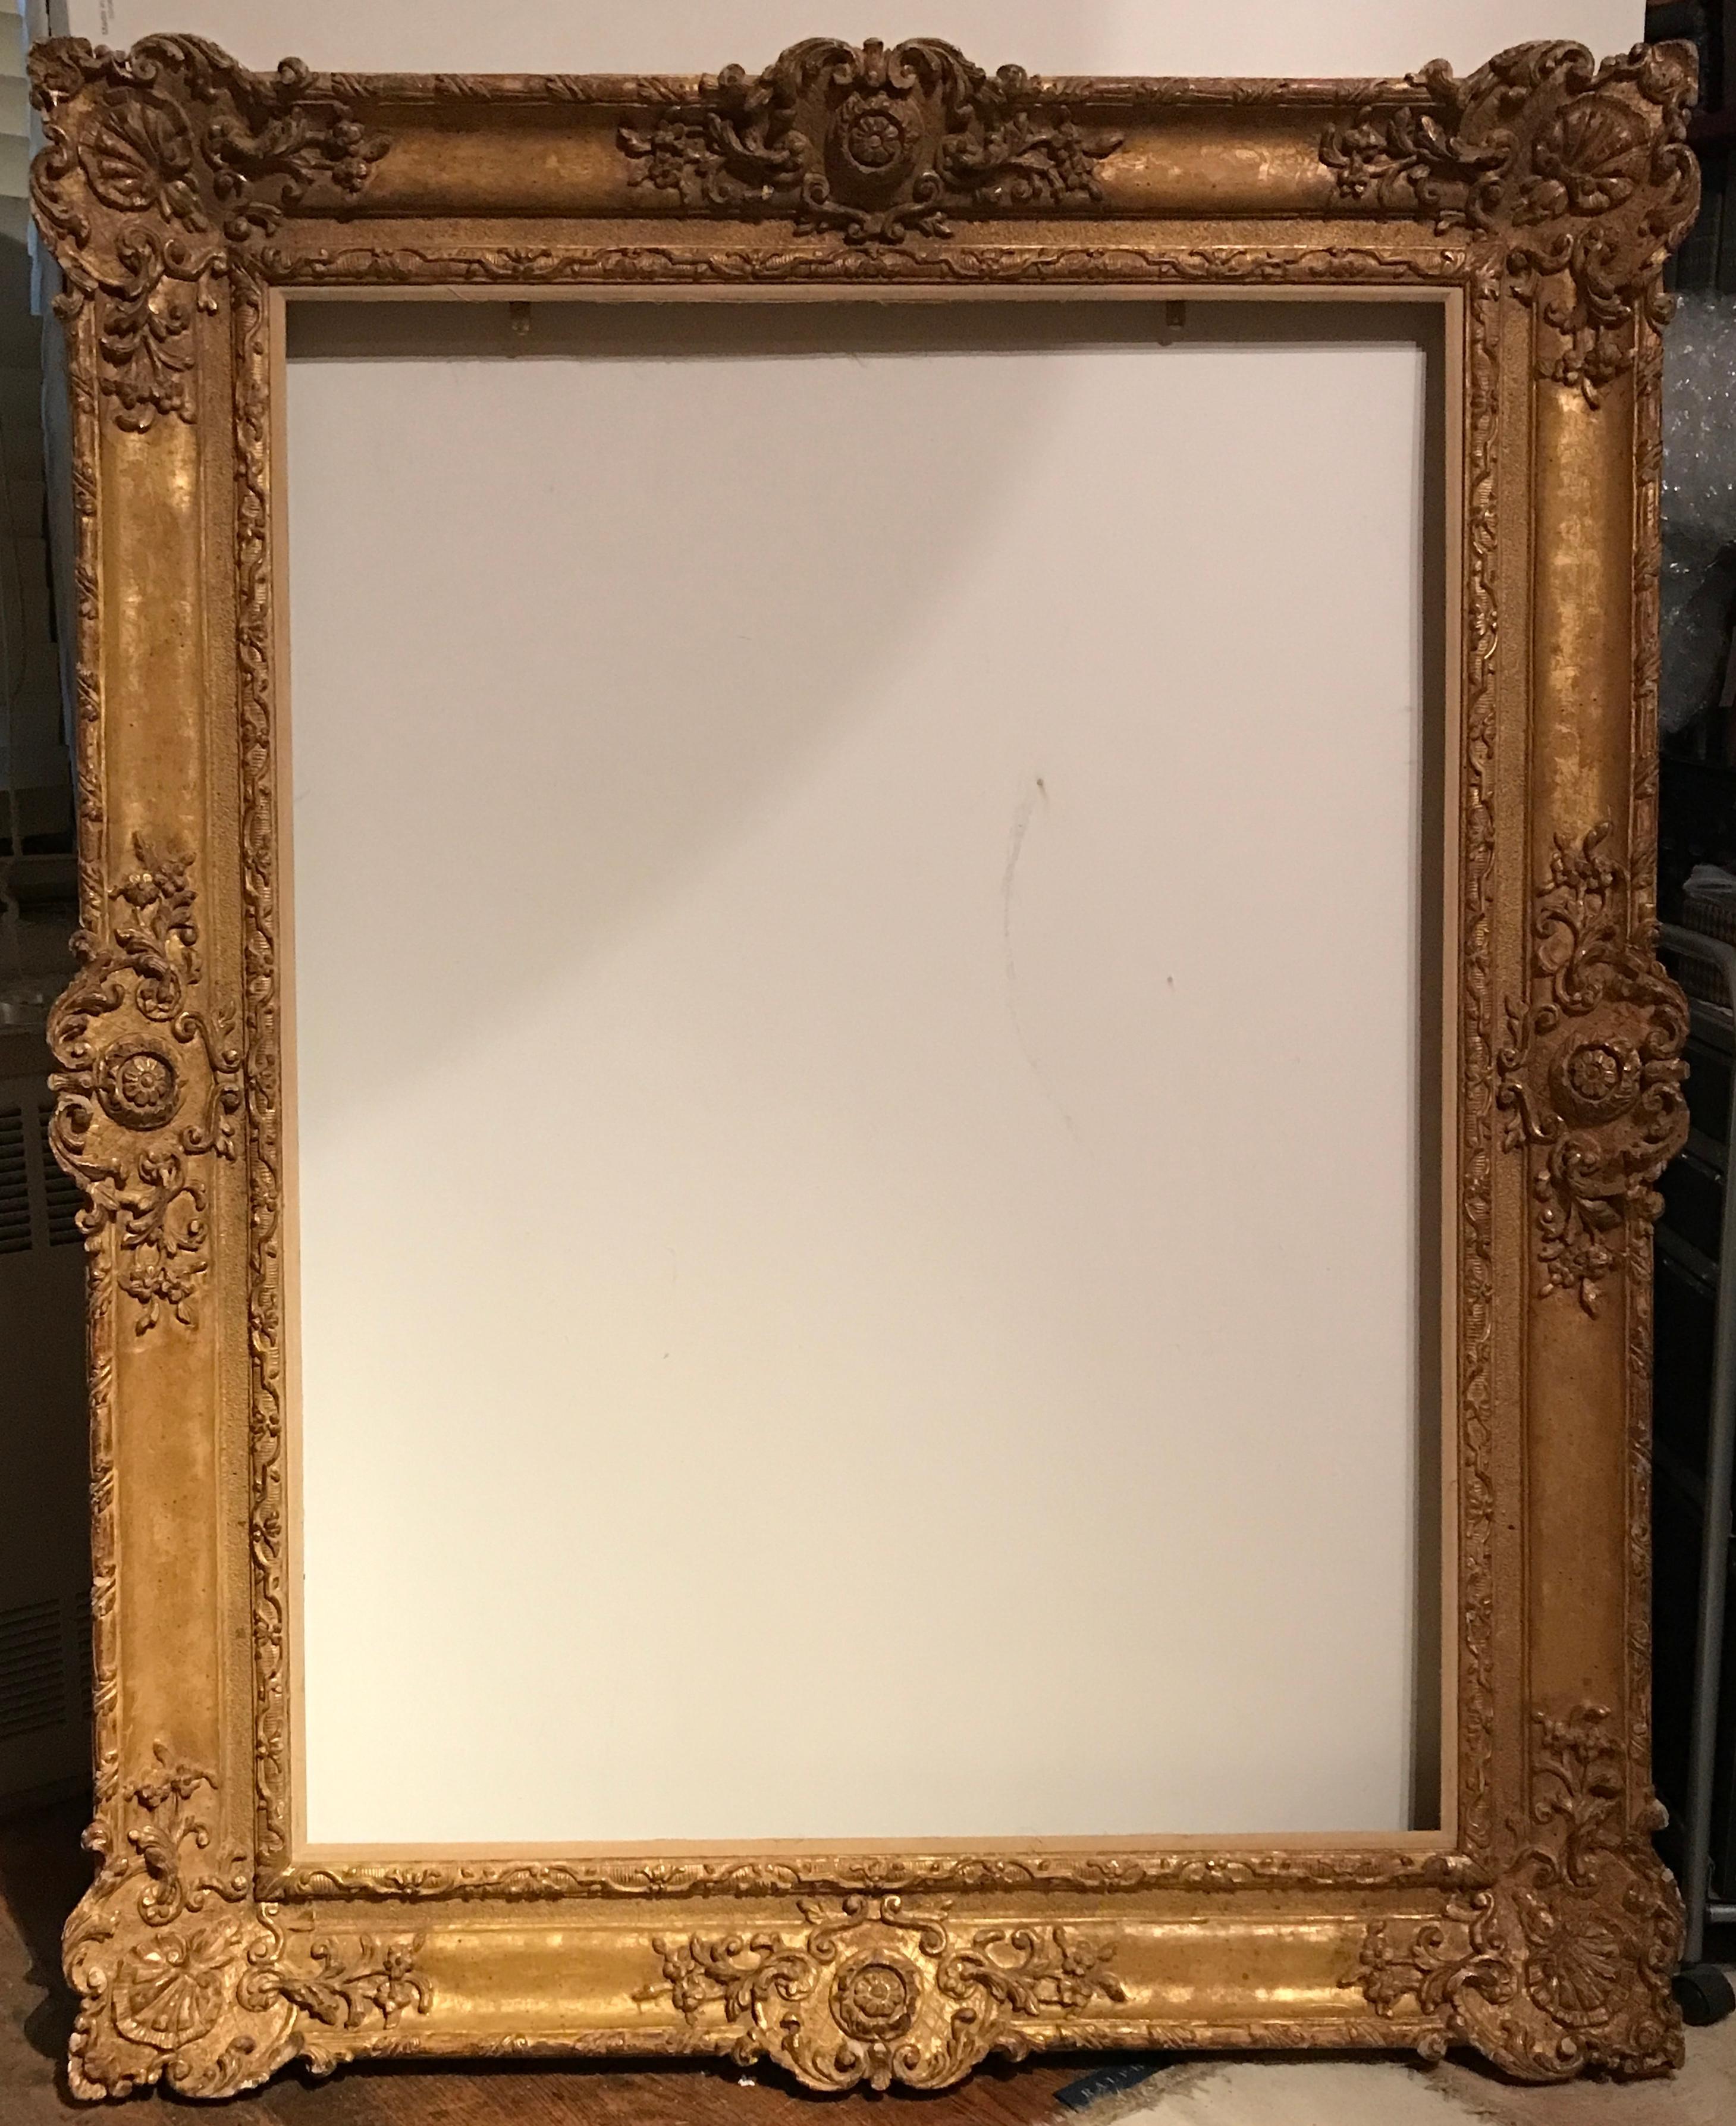 VINTAGE LOUIS XVI FRAME FOR 40" X 30" OIL PAINTING OVERALL 52" X 42" - Art by Unknown